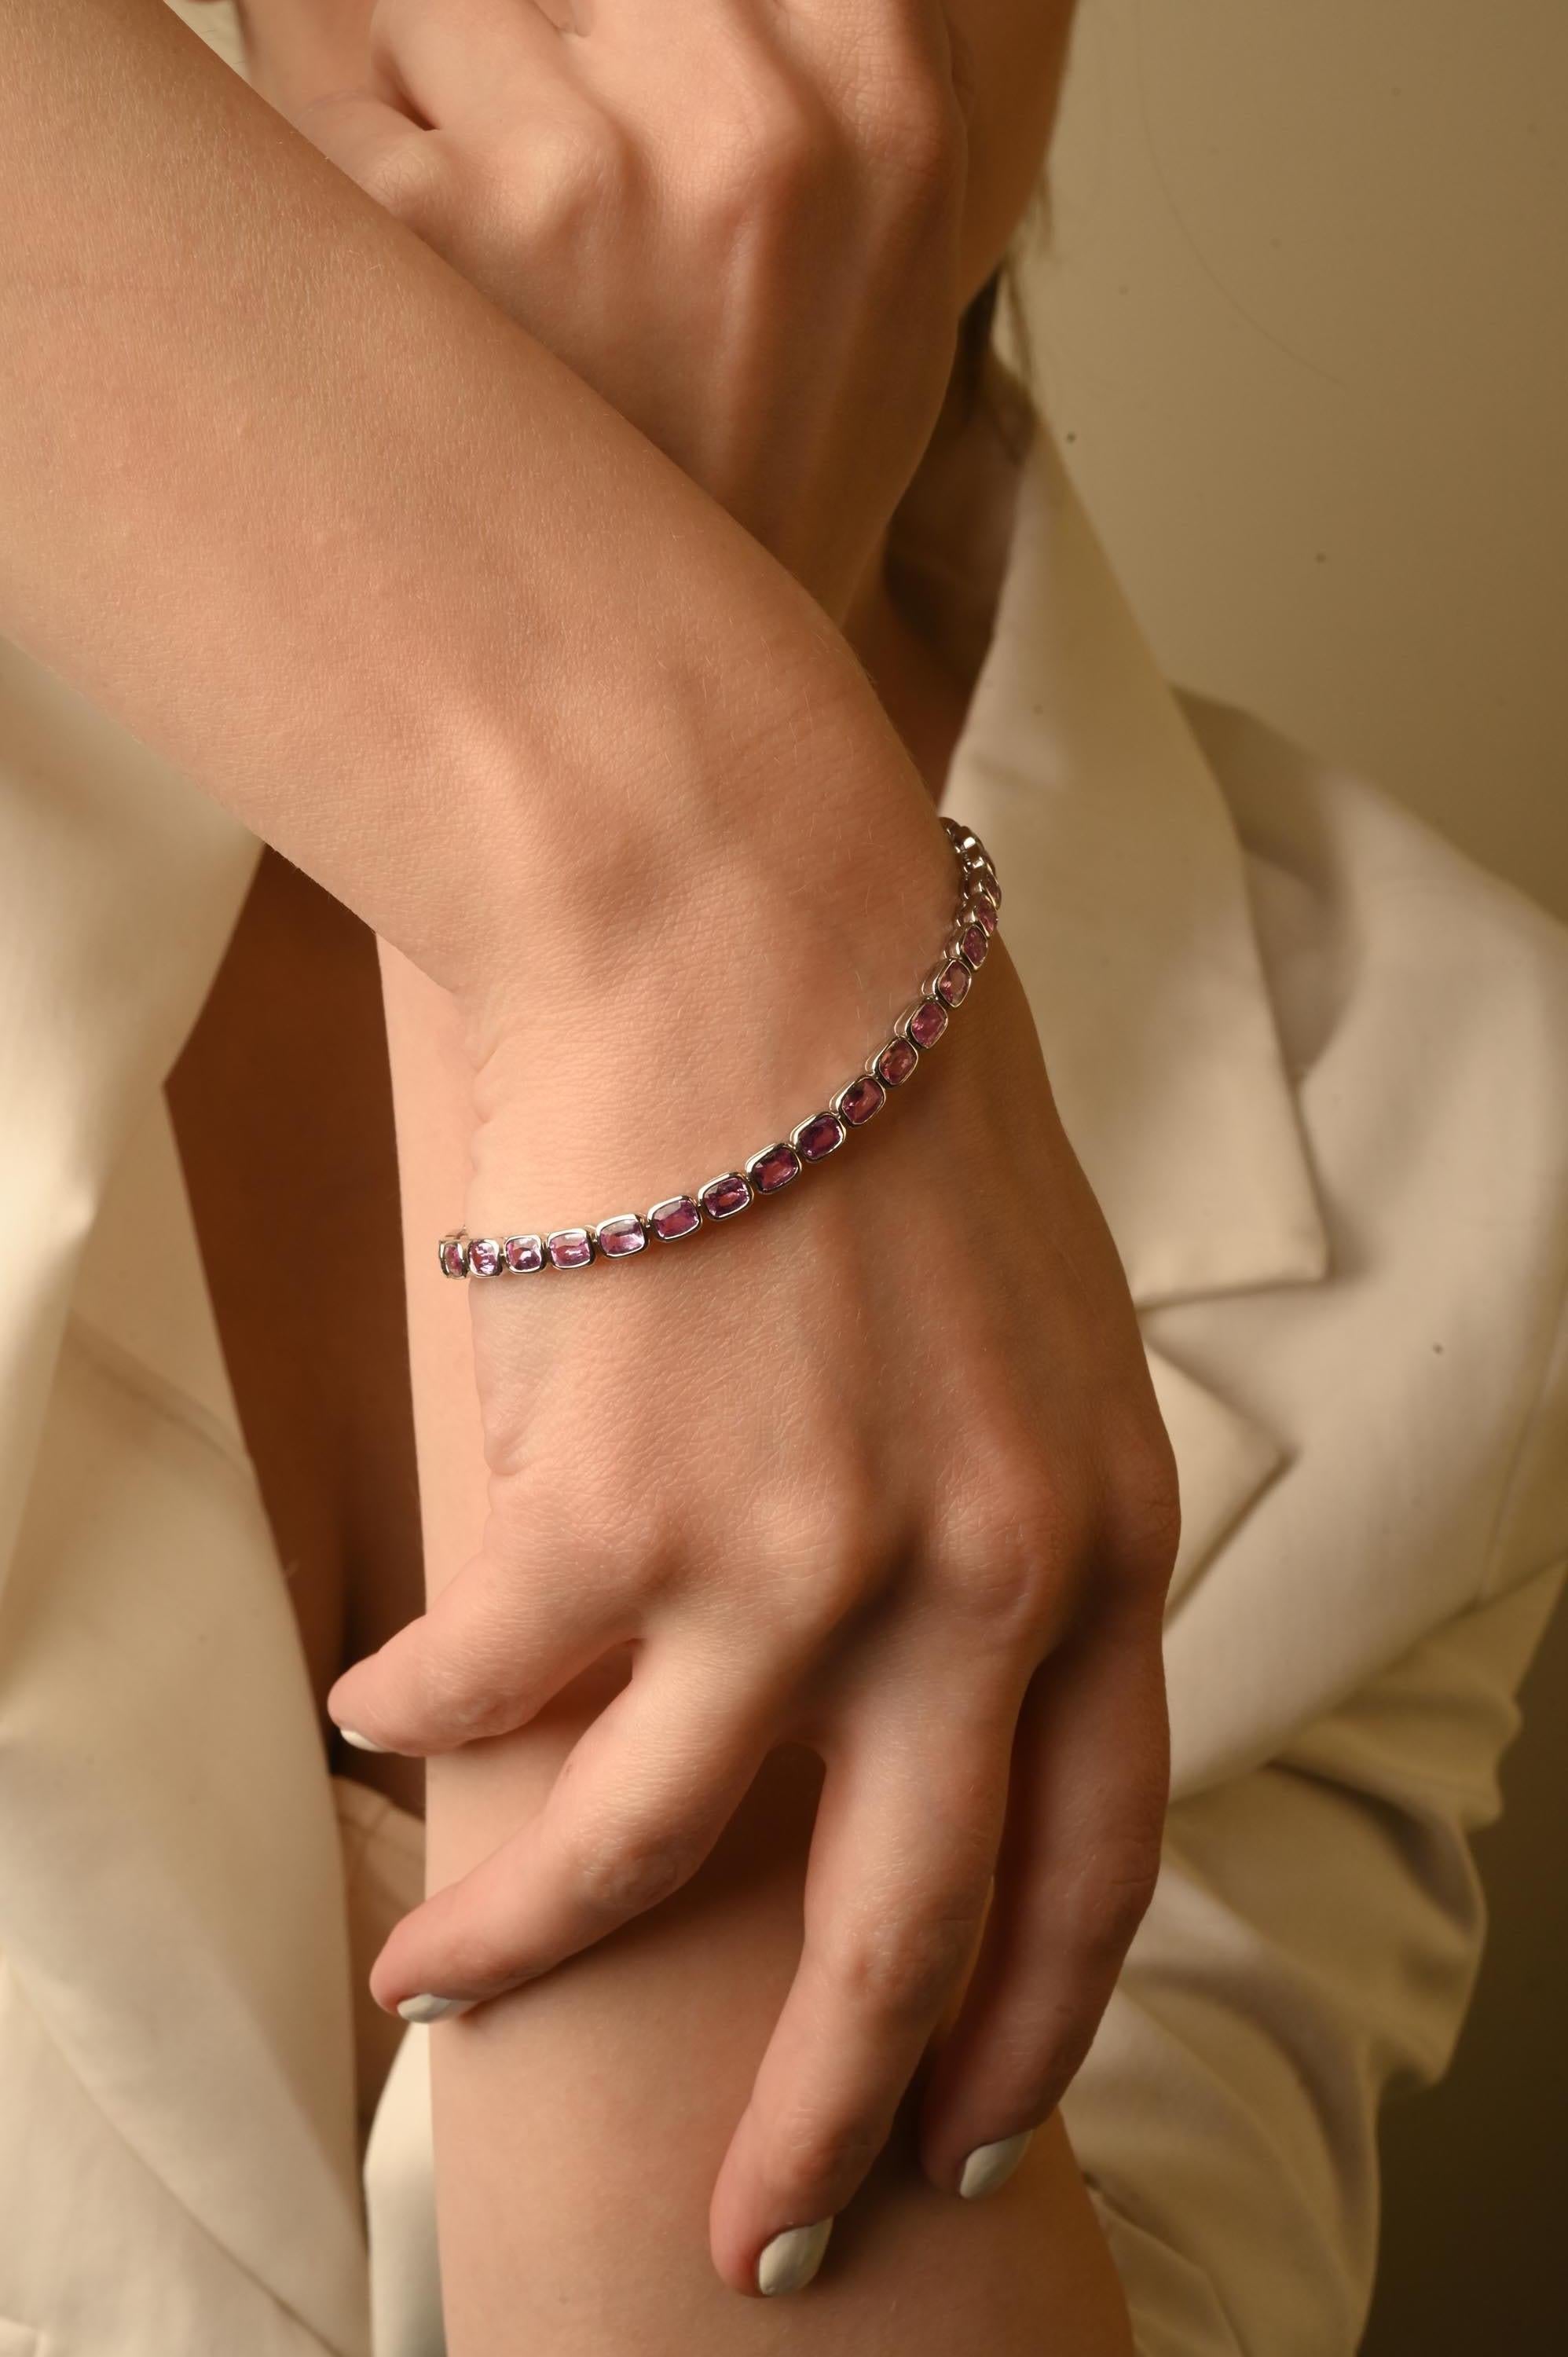 Pink Sapphire bracelet in 18K Gold. It has a perfect oval cut gemstone diamonds to make you stand out on any occasion or an event. 
A tennis bracelet is an essential piece of jewelry when it comes to your wedding day. The sleek and elegant style